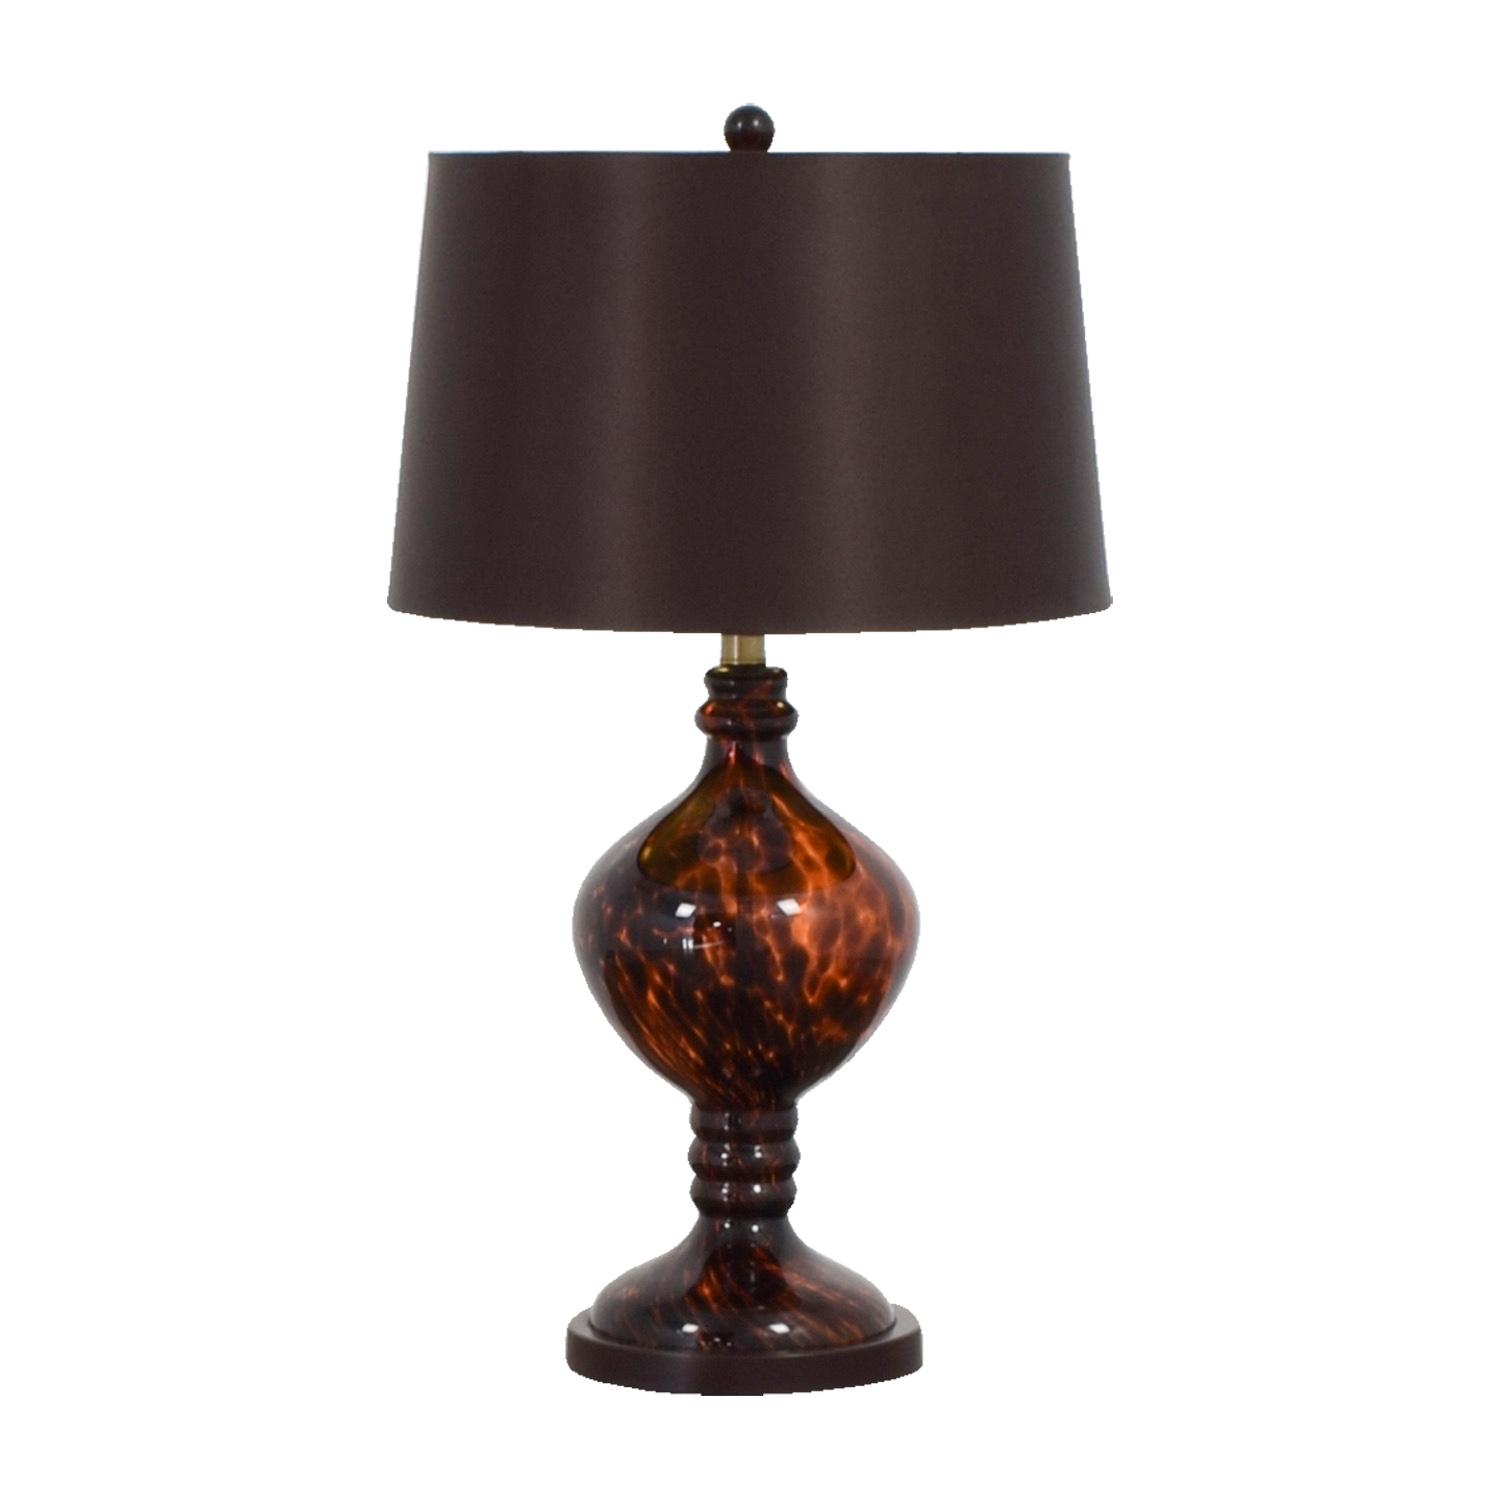 82 Off Pier 1 Pier 1 Imports Amber Table Lamp Decor for proportions 1500 X 1500